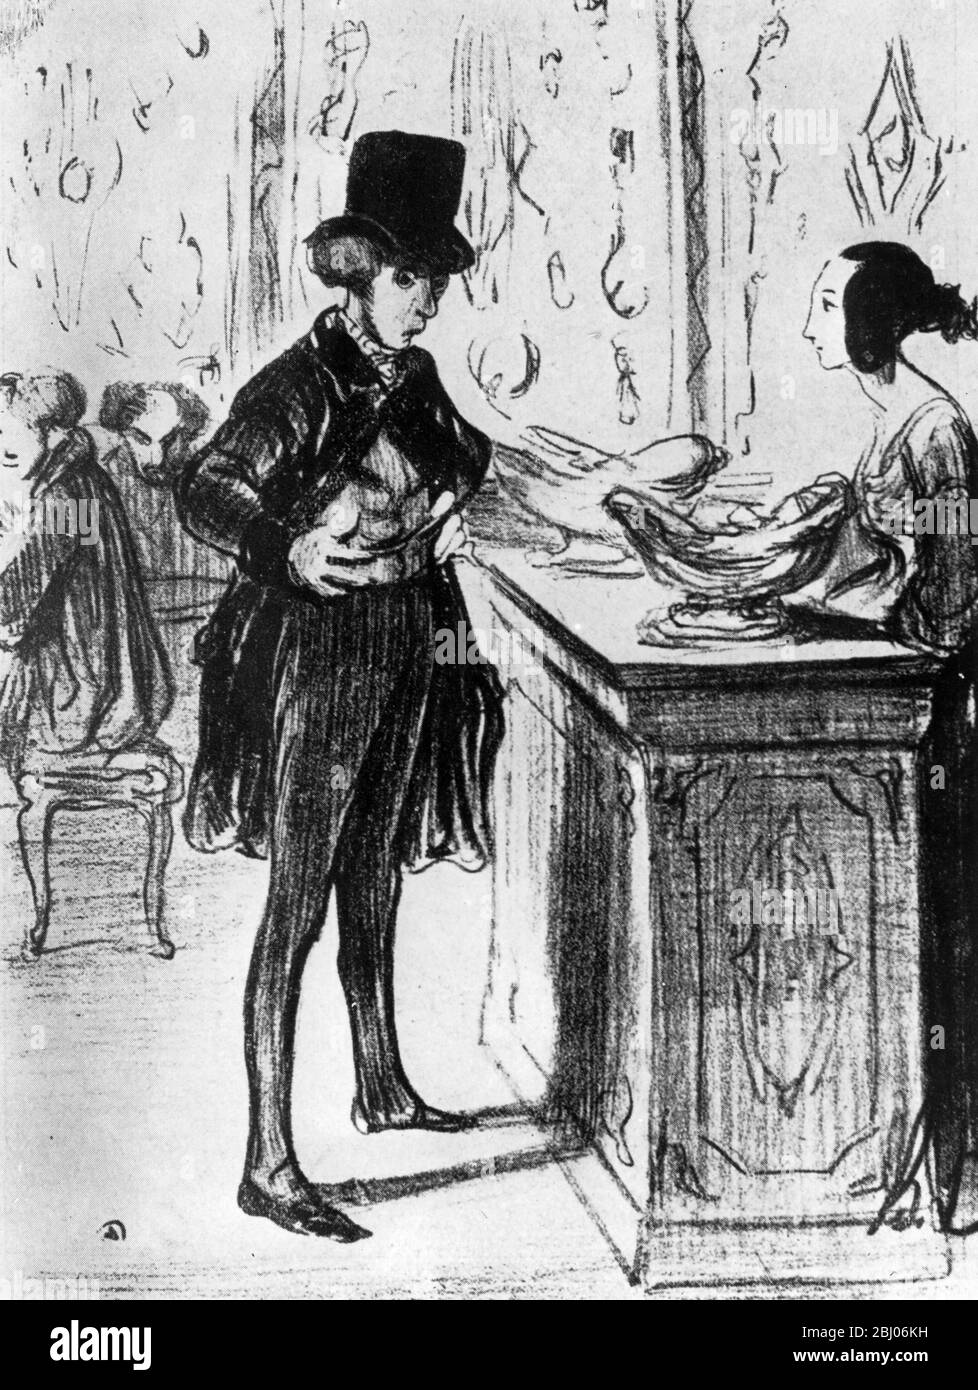 A regular of the cafe during the Second Empire - by Honore Daumier (d.1879) Stock Photo